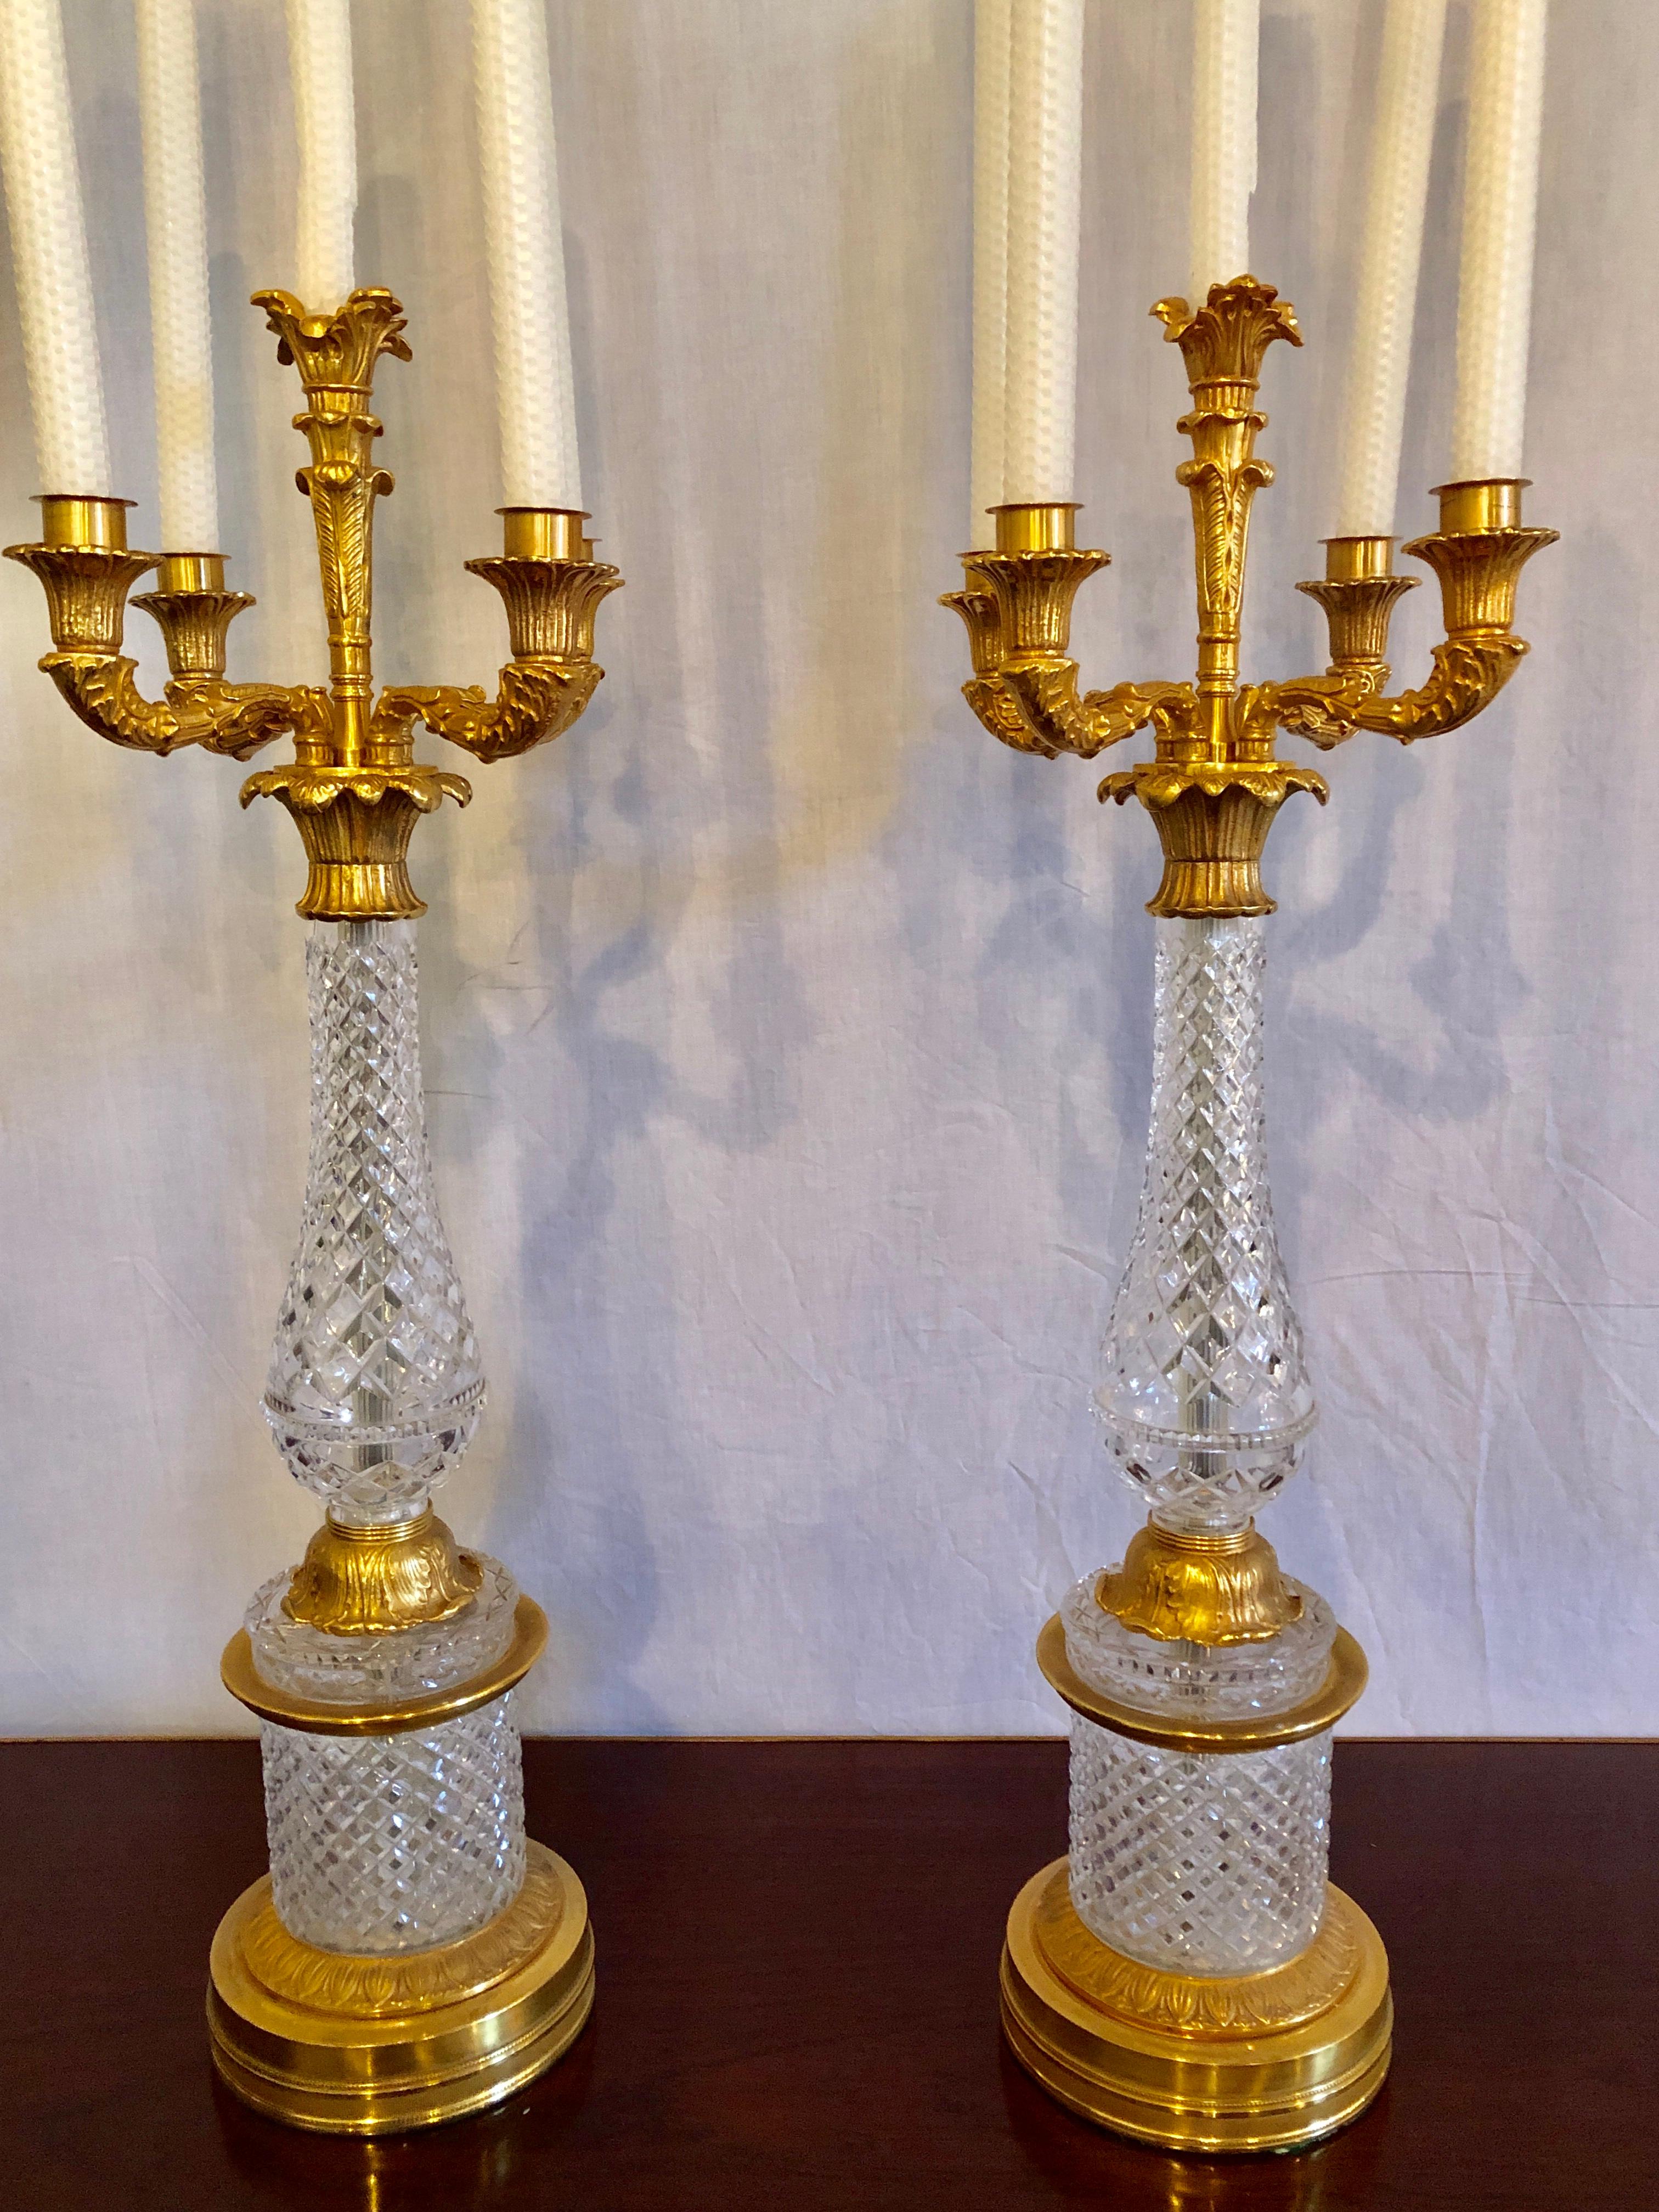 Large and impressive pair of crystal and gilt brass table candelabras. Fine quality circa 1930s. These cut and crafted candelabras can easily be converted into table lamps should the need arise. The Louis XVI style gilt metal is chased in the finest